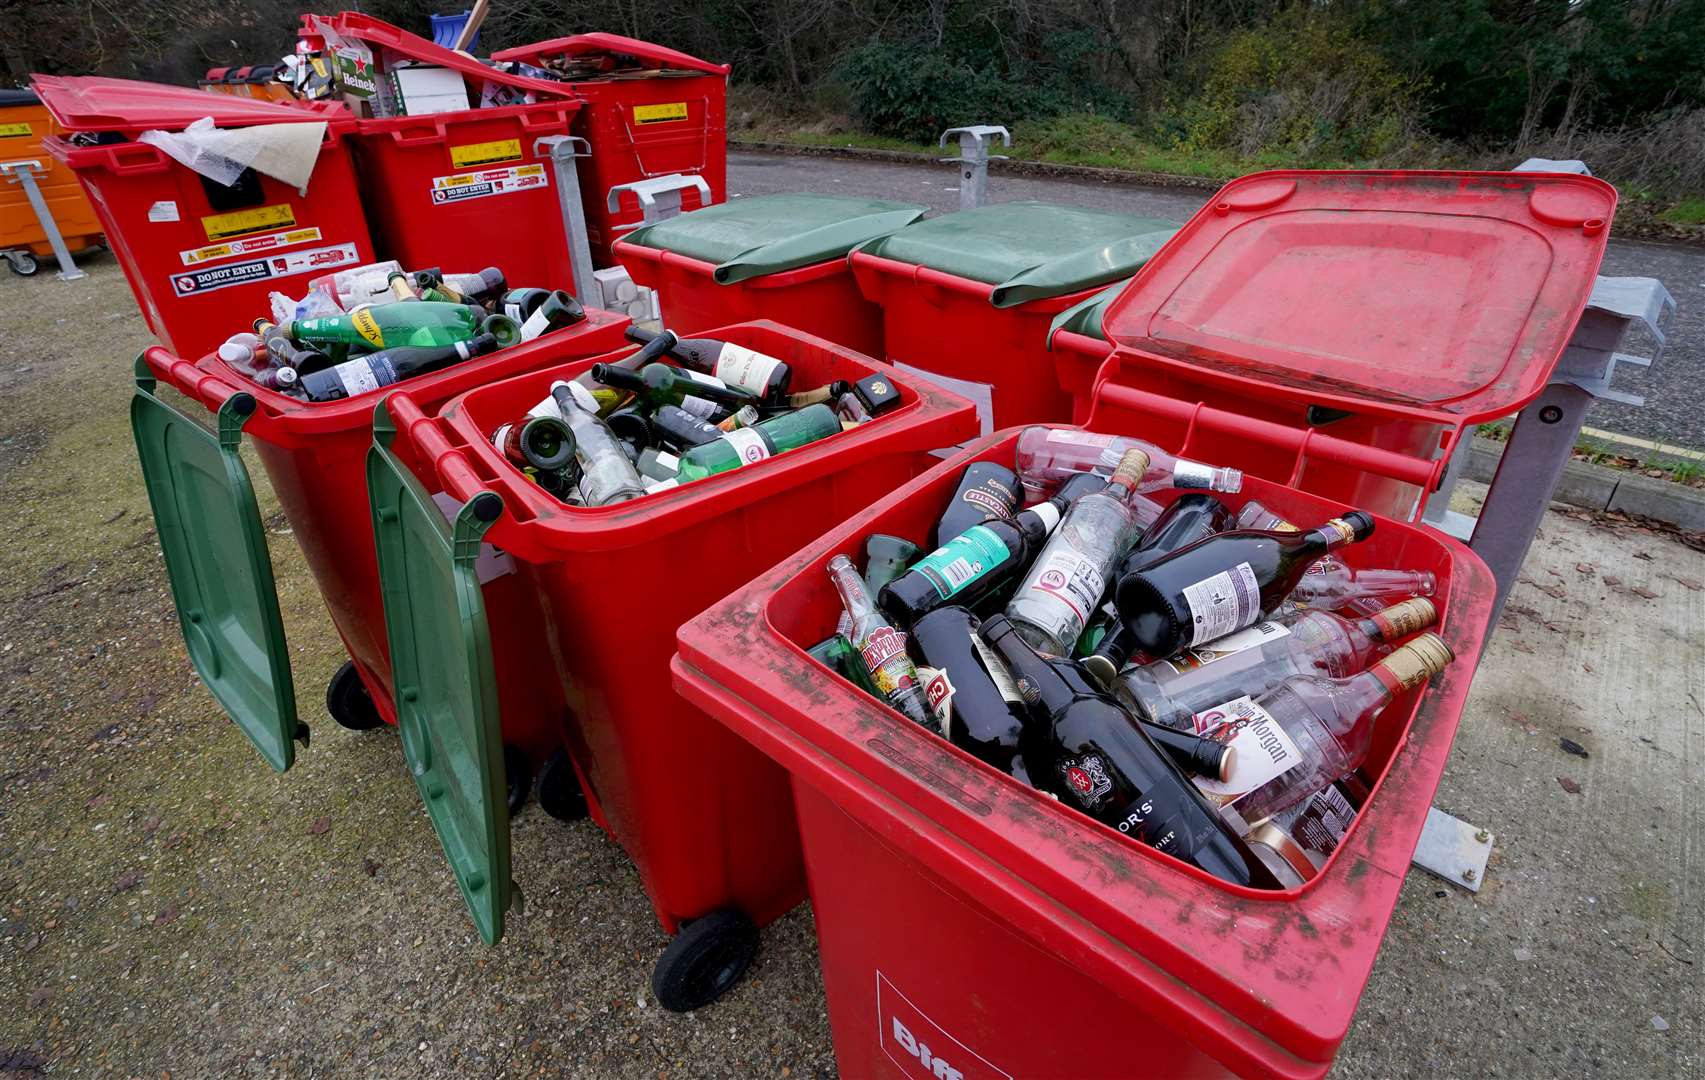 Councils are warning recycling centres could be scaled back due to cost pressures (Gareth Fuller/PA)